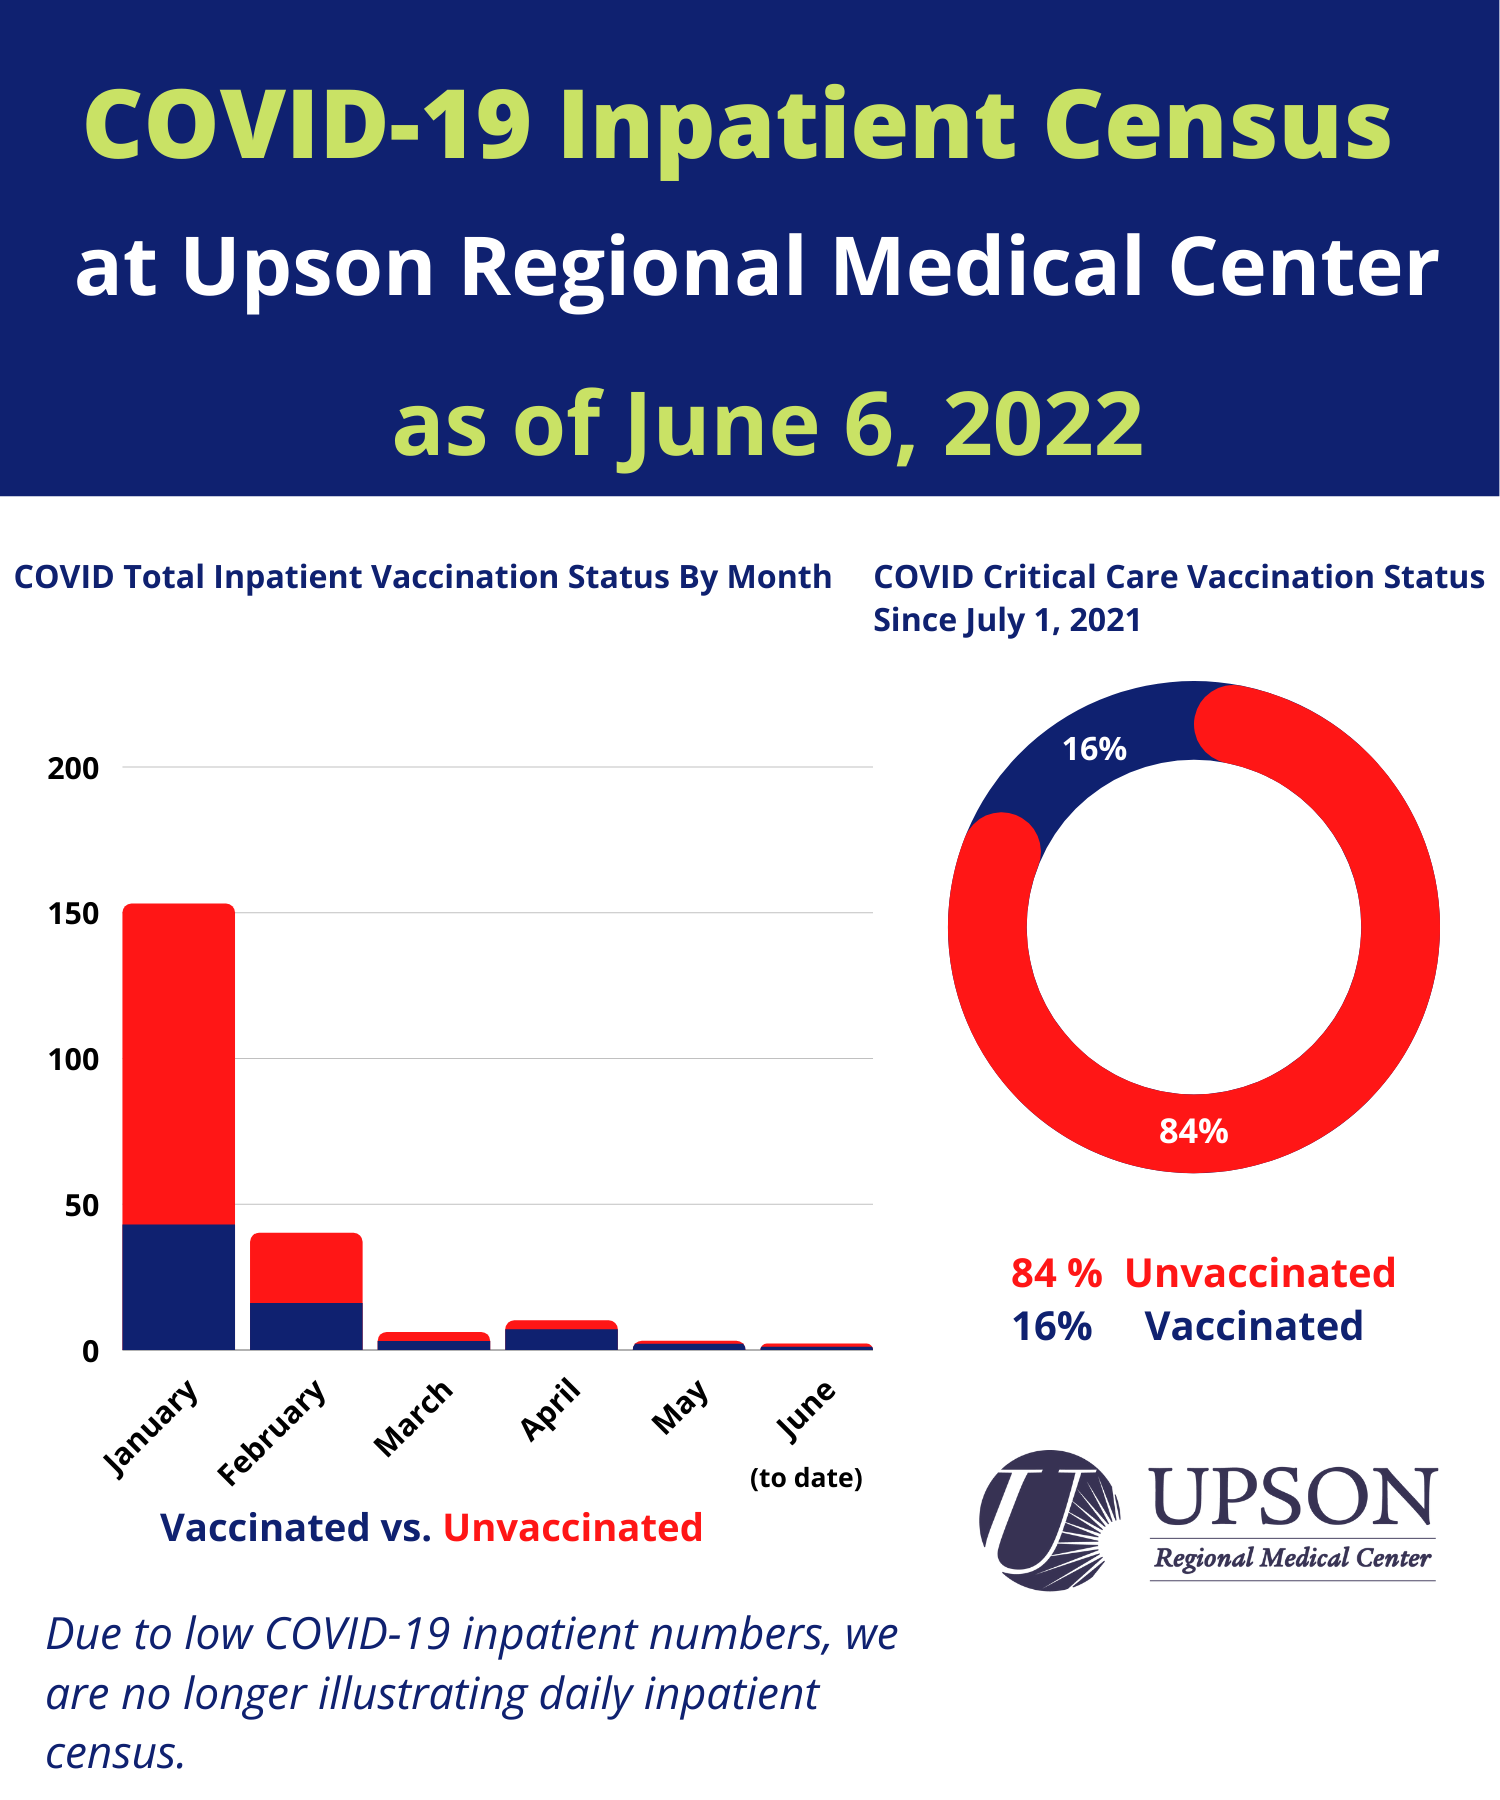 Photo for URMC COVID Patients as of June 6, 2022